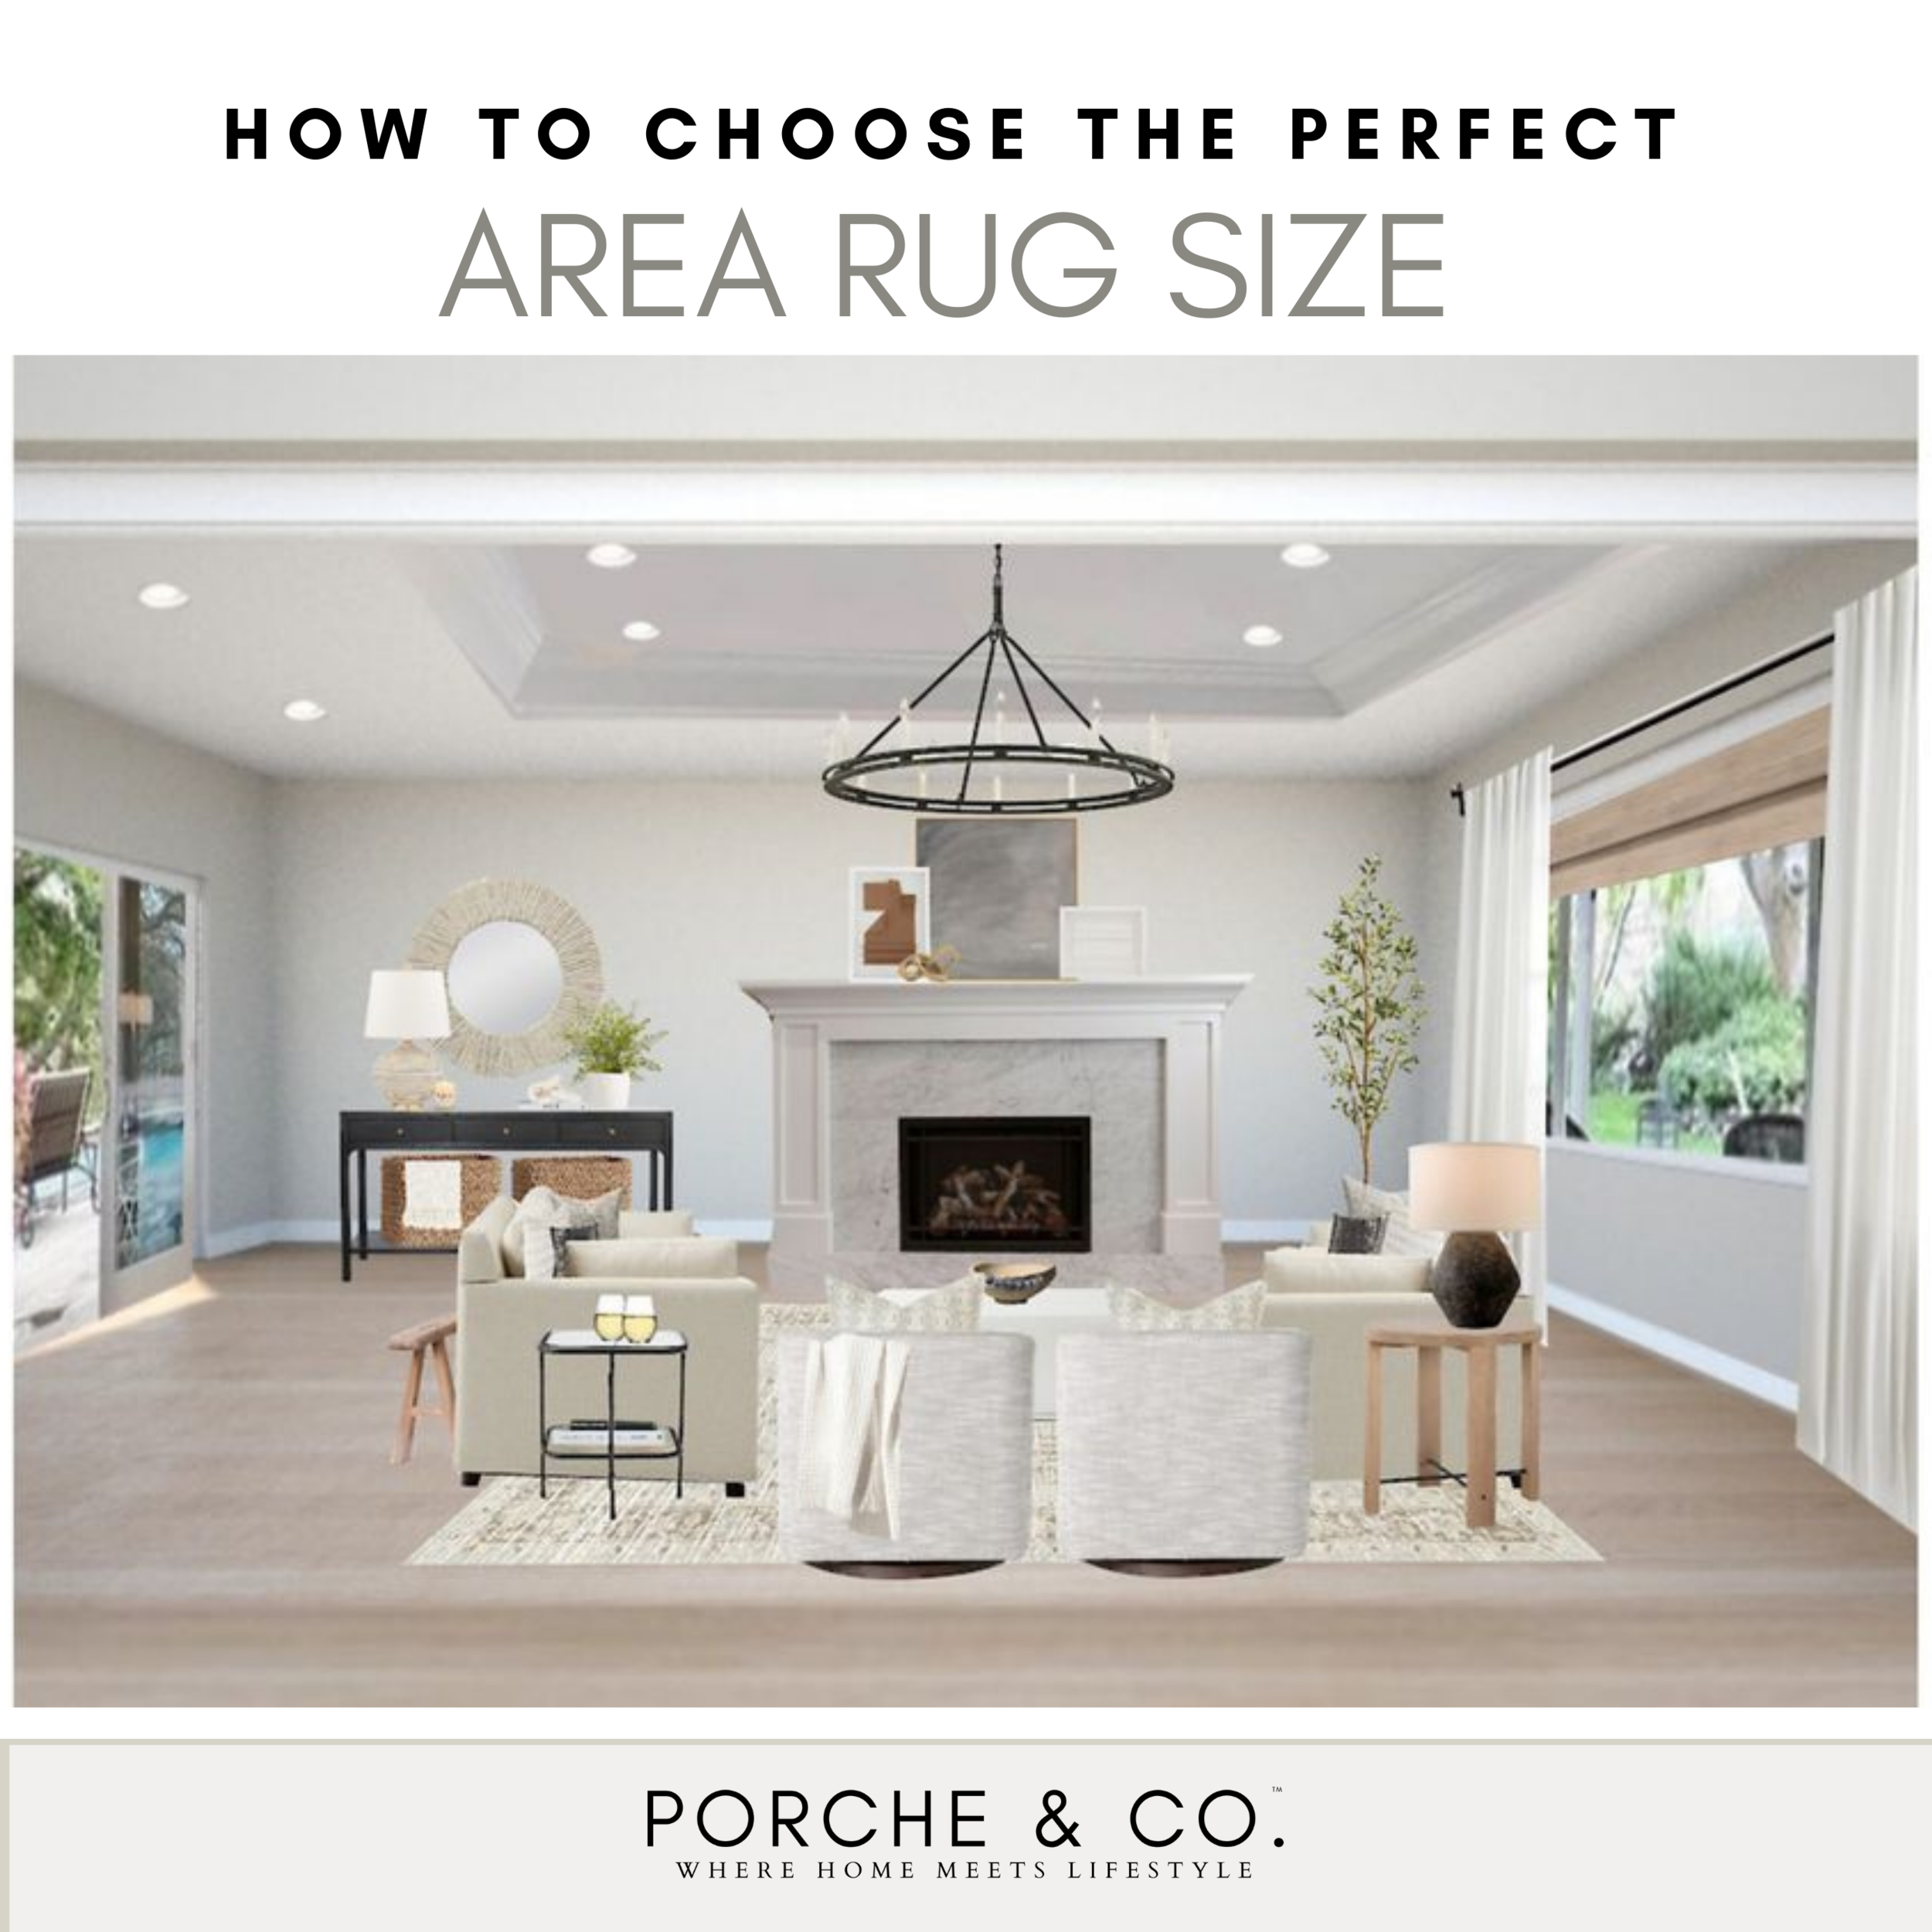 How to Choose the Best Living Room Rug for Your Home